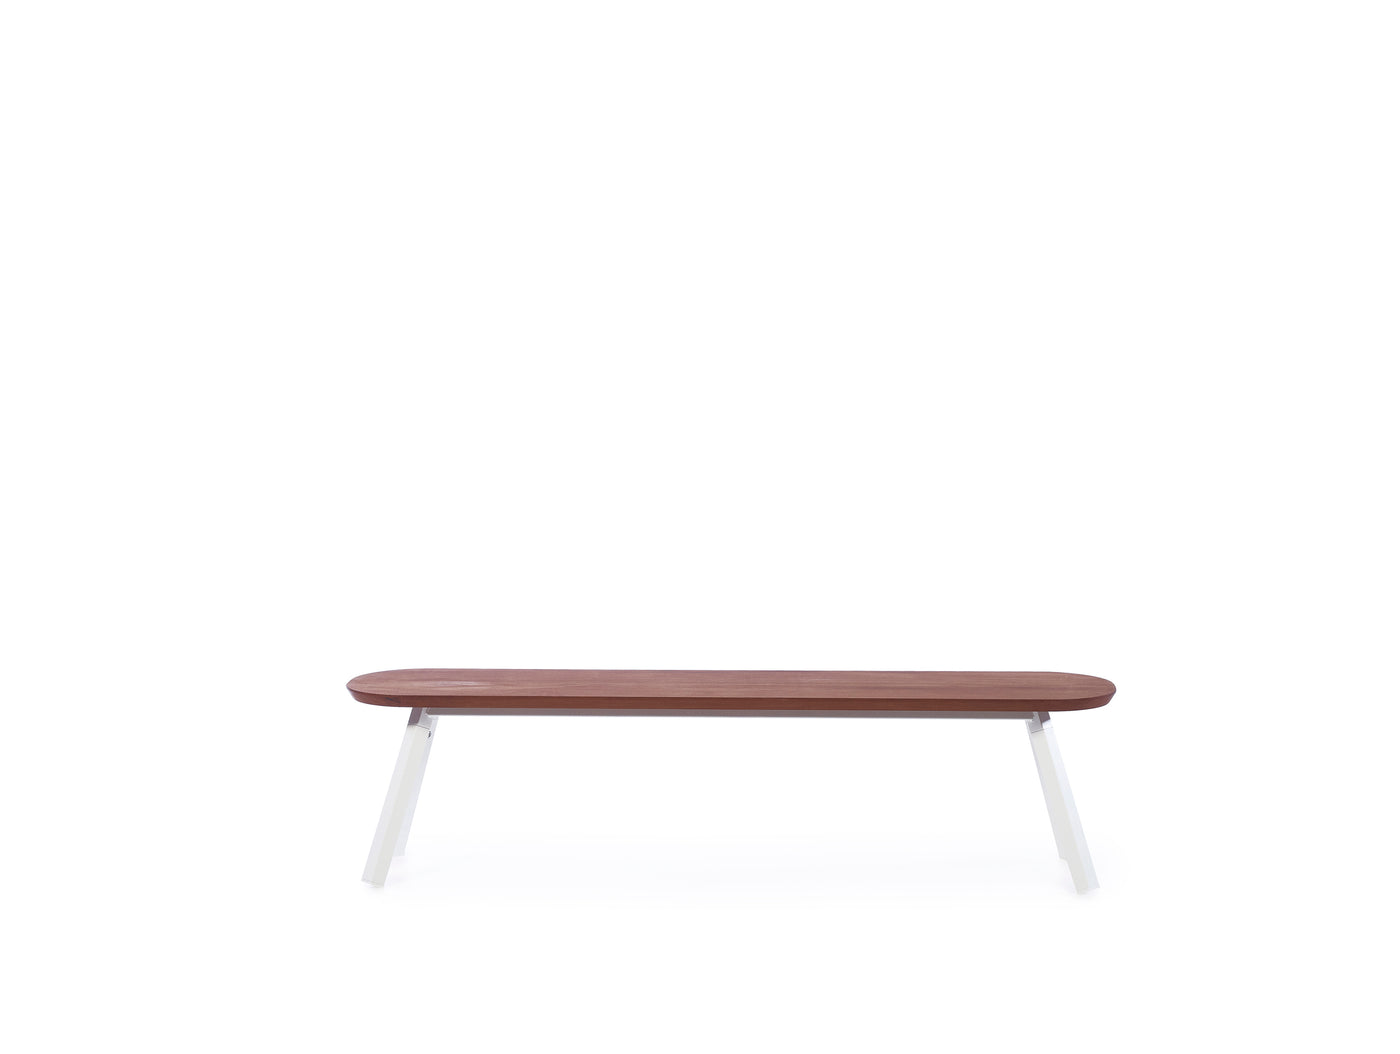 RS Barcelona You and Me Indoor / Outdoor Bench 180 Iroko, Kit of Two